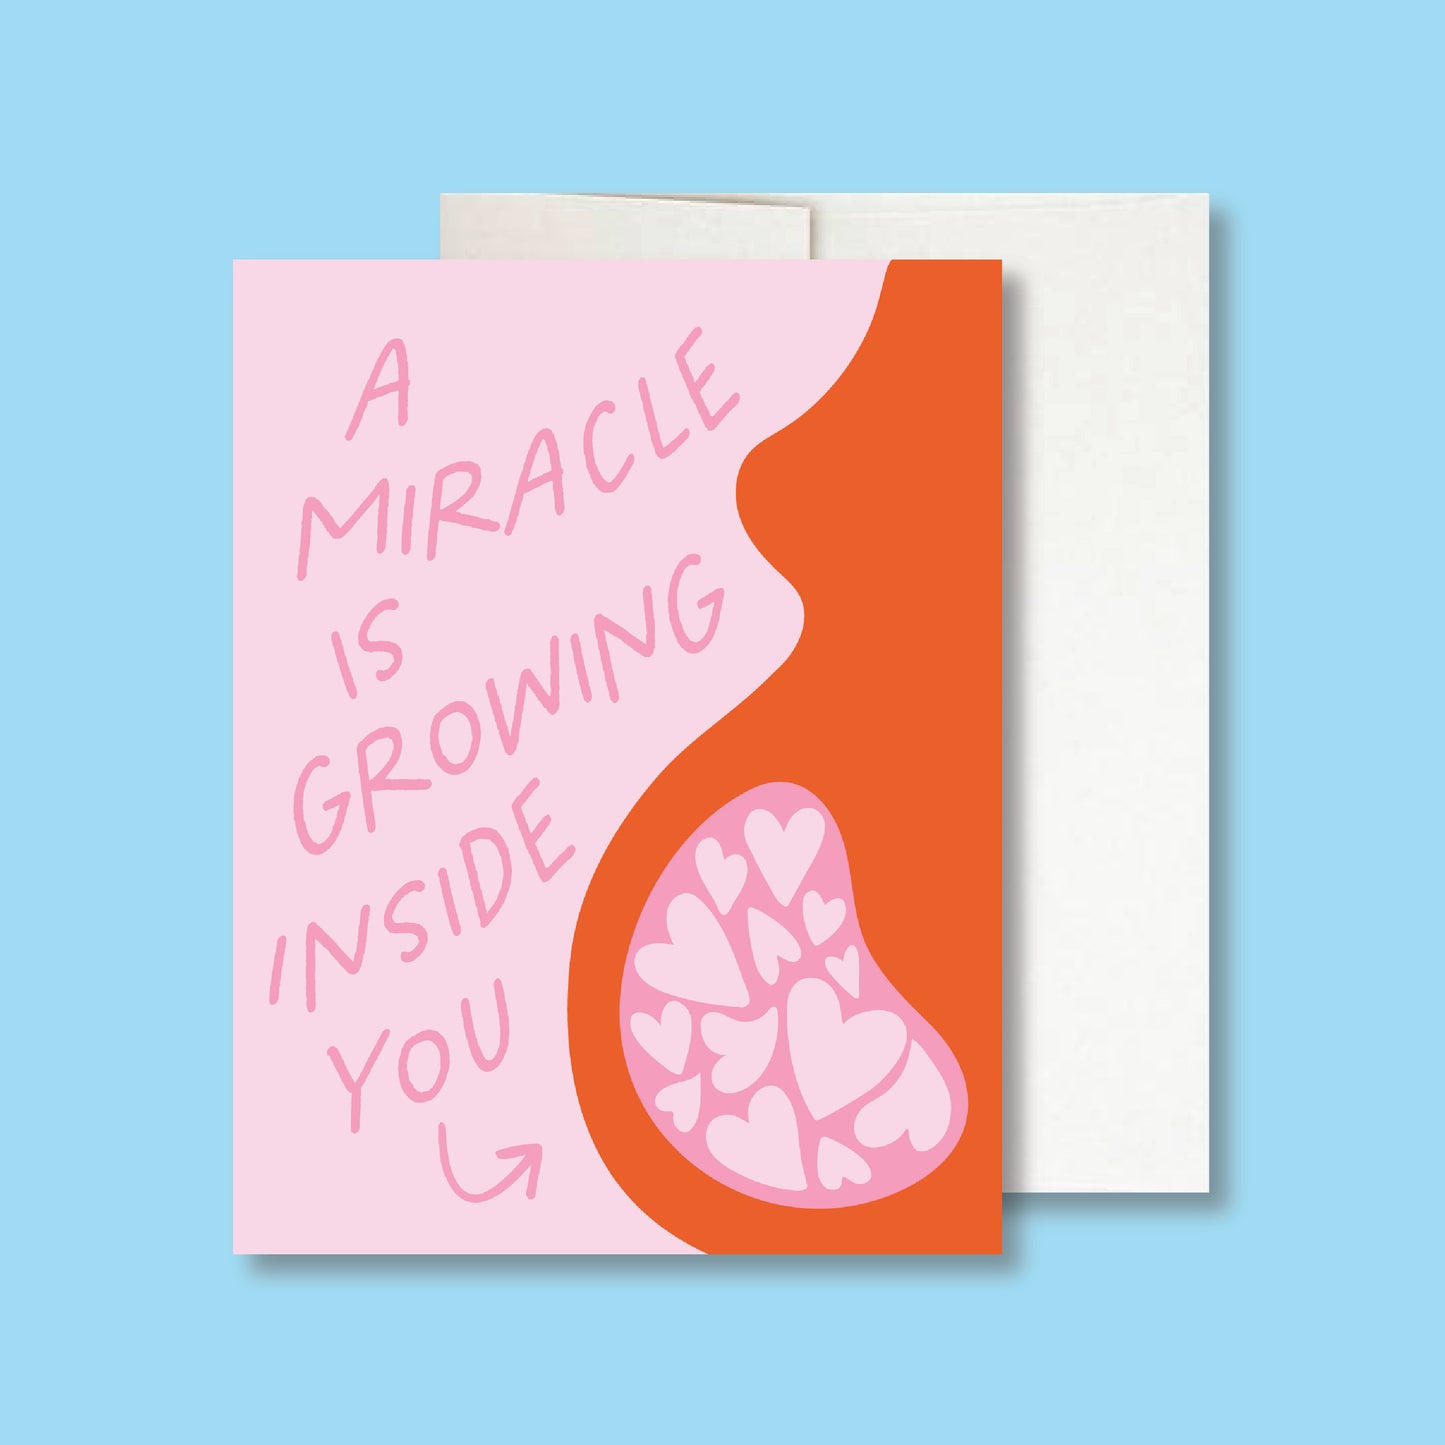 A Miracle is Growing Inside You Card